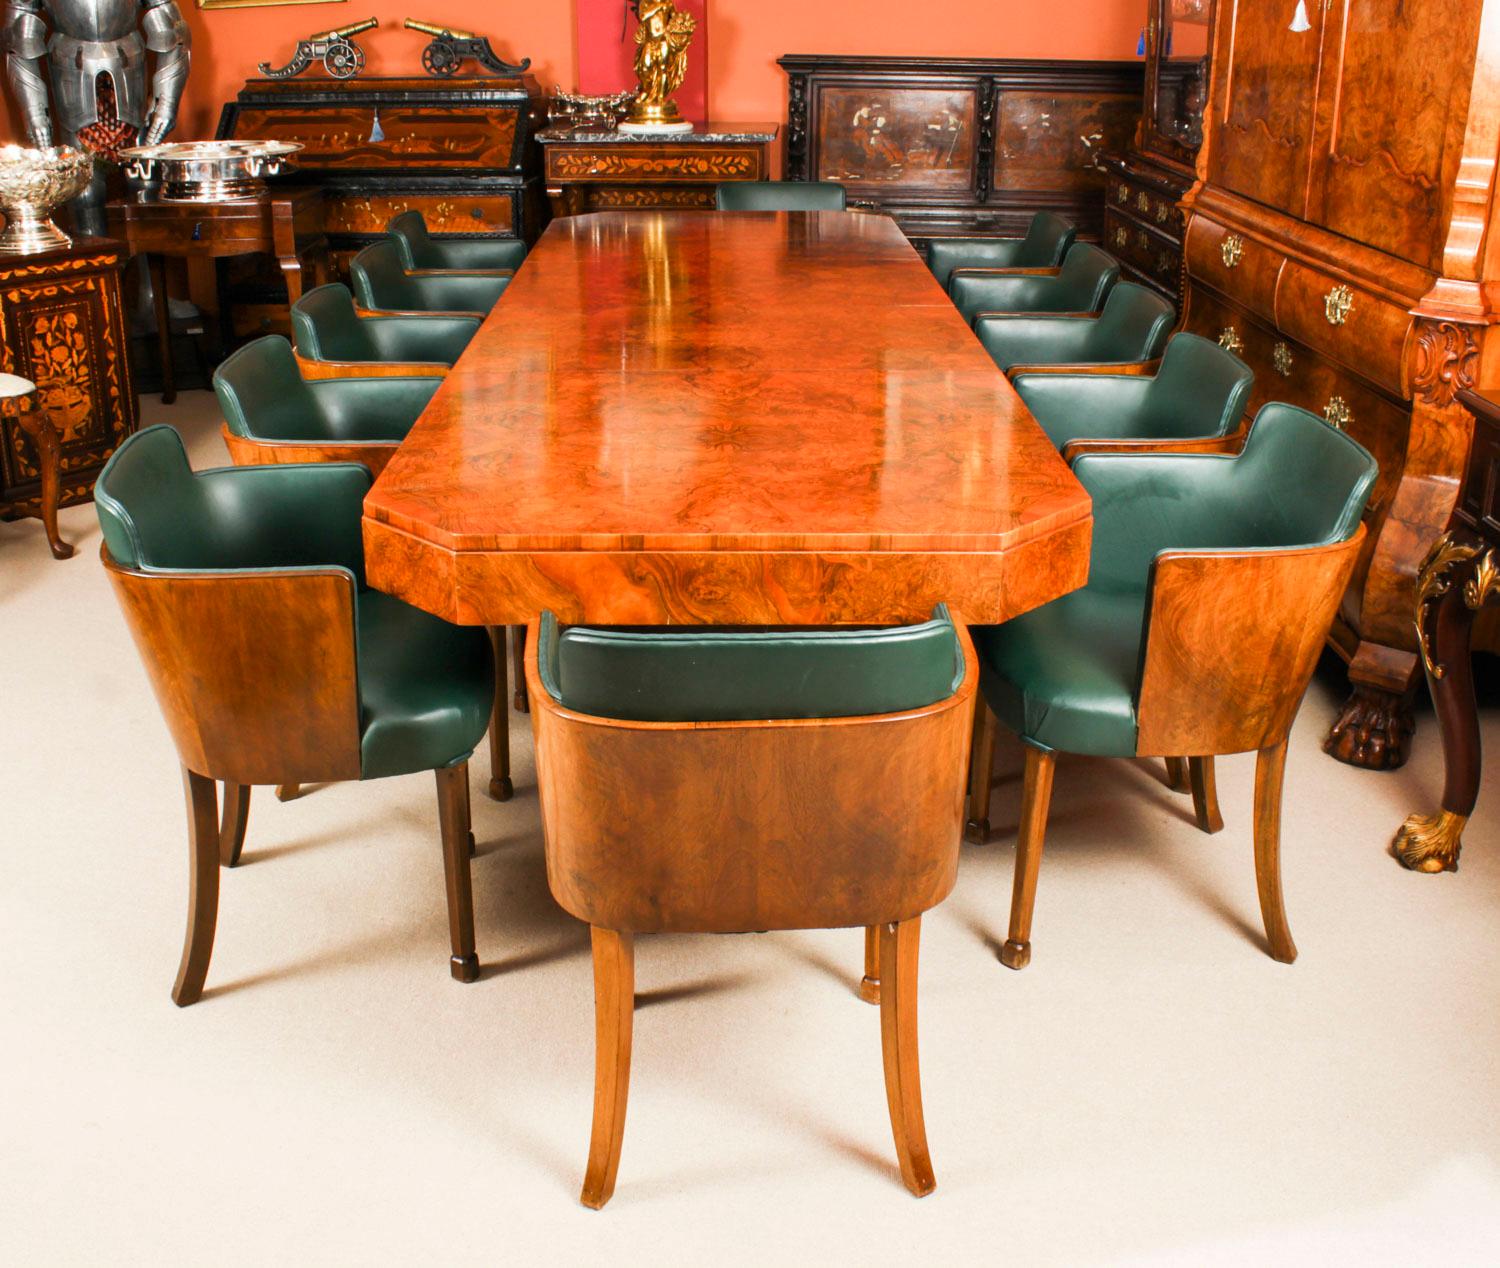 A fine rare large Art Deco burr walnut Extending Dining table and twelve matching chairs following a design by Ray Hille, circa 1920 in date.
 
The stunning rectagular top with canted corners has has been hand-crafted from burr walnut, which has a